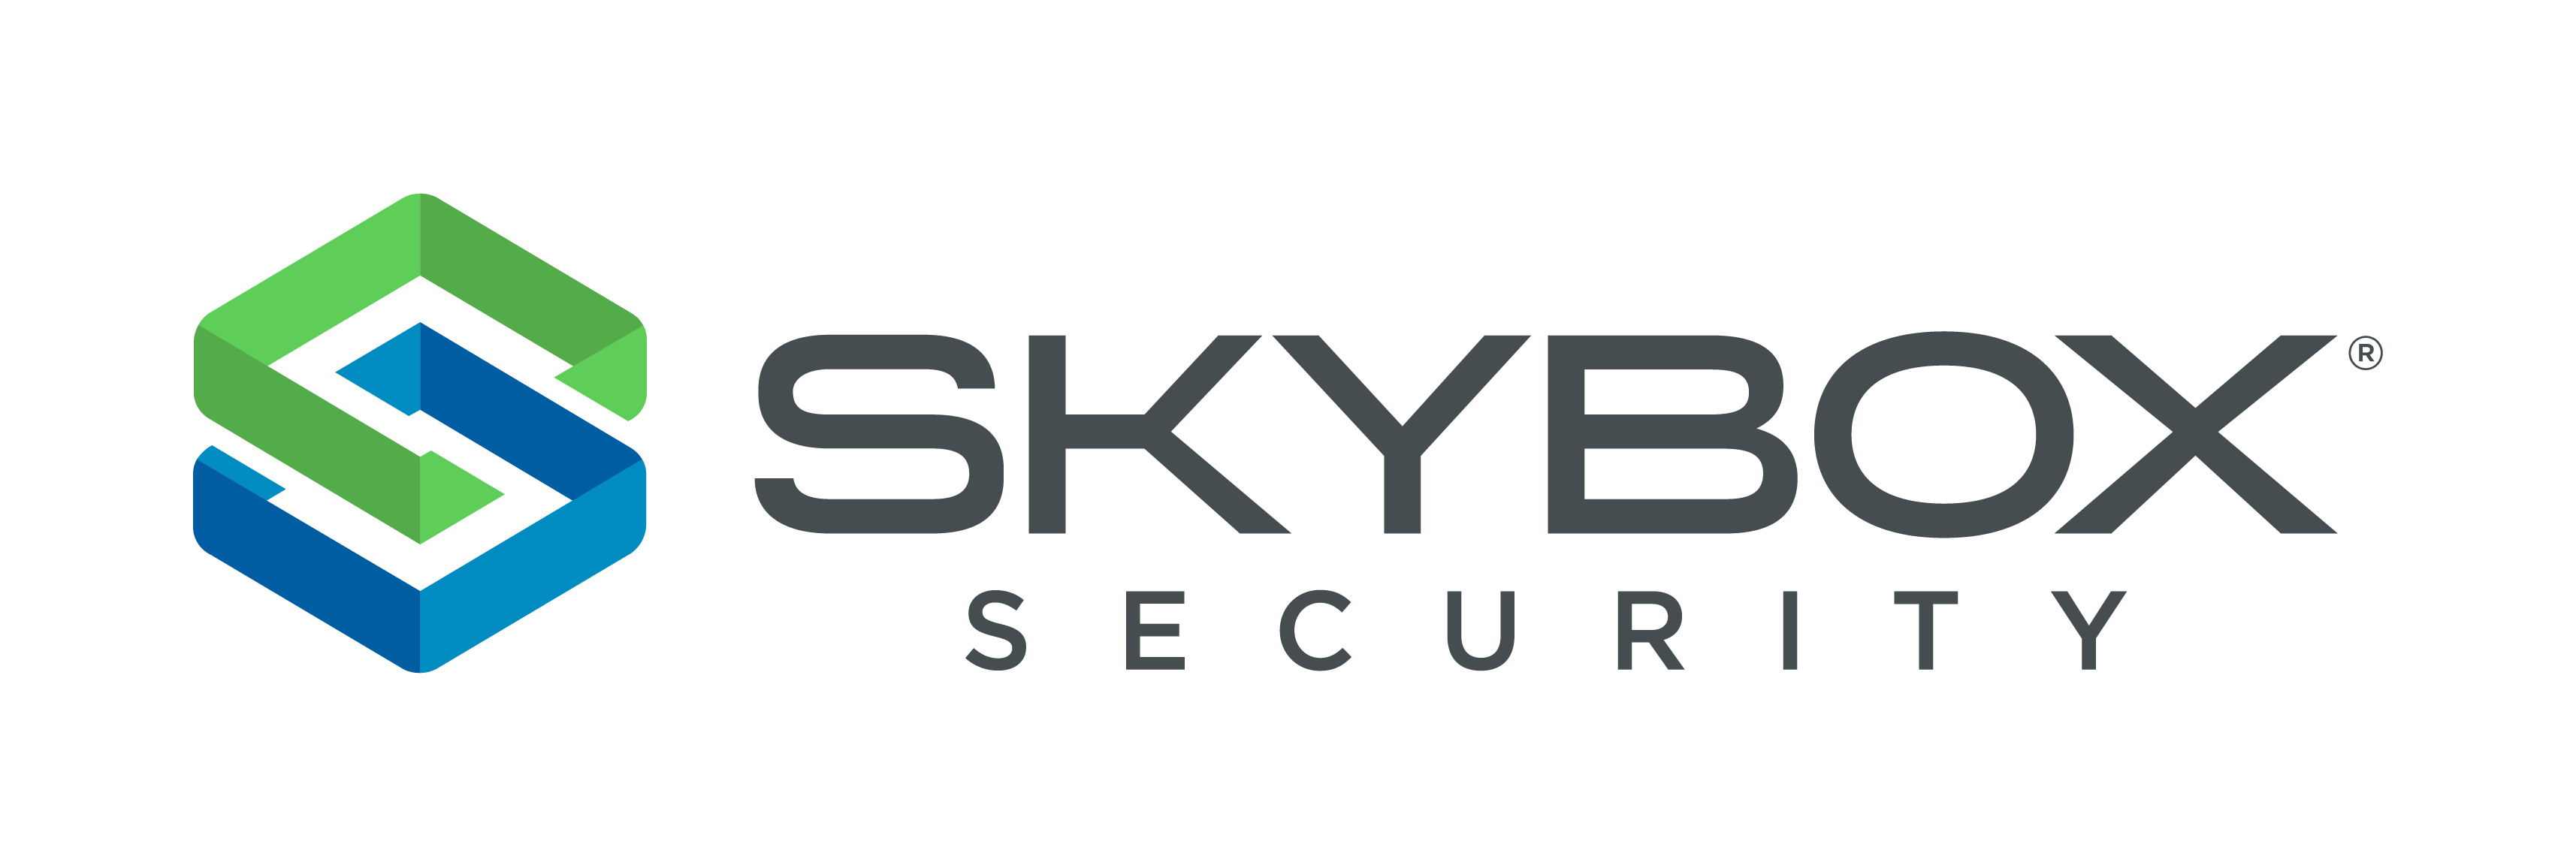 Skybox Security and 